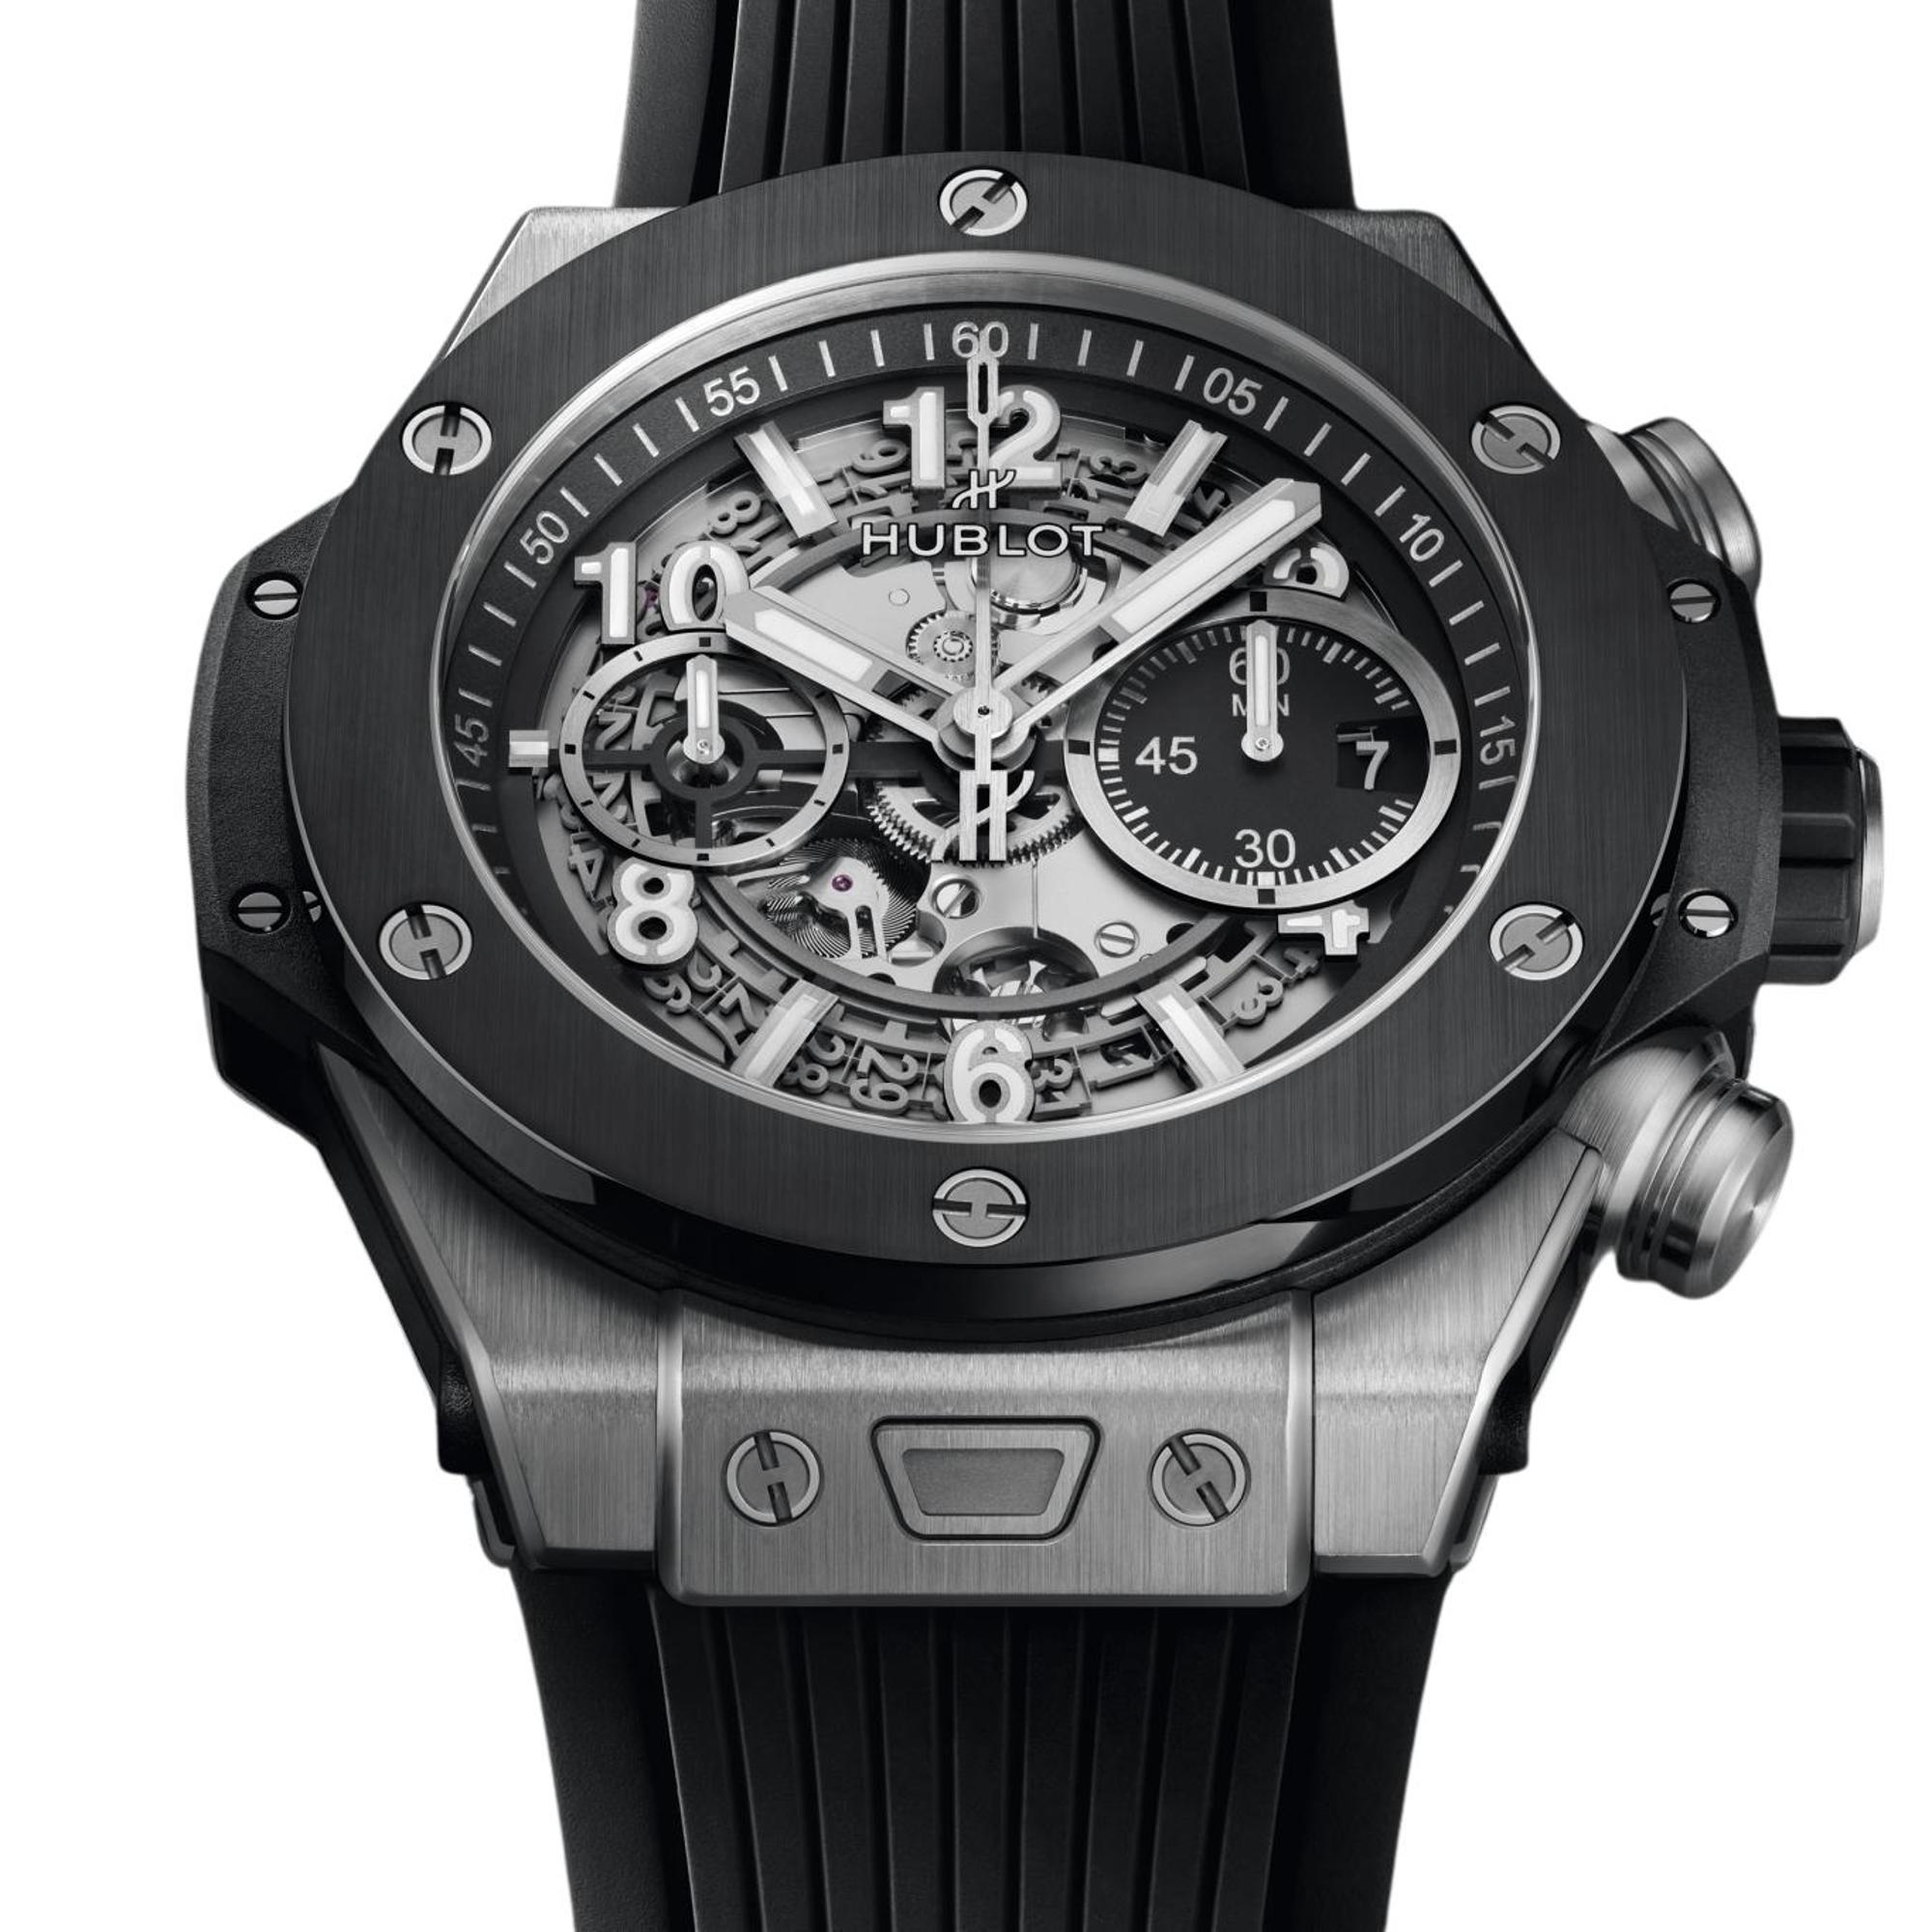 Hublot Big Bang Chronograph Titanium Skeleton Black Dial Watch 421.NM.1170.RX In New Condition For Sale In New York, NY